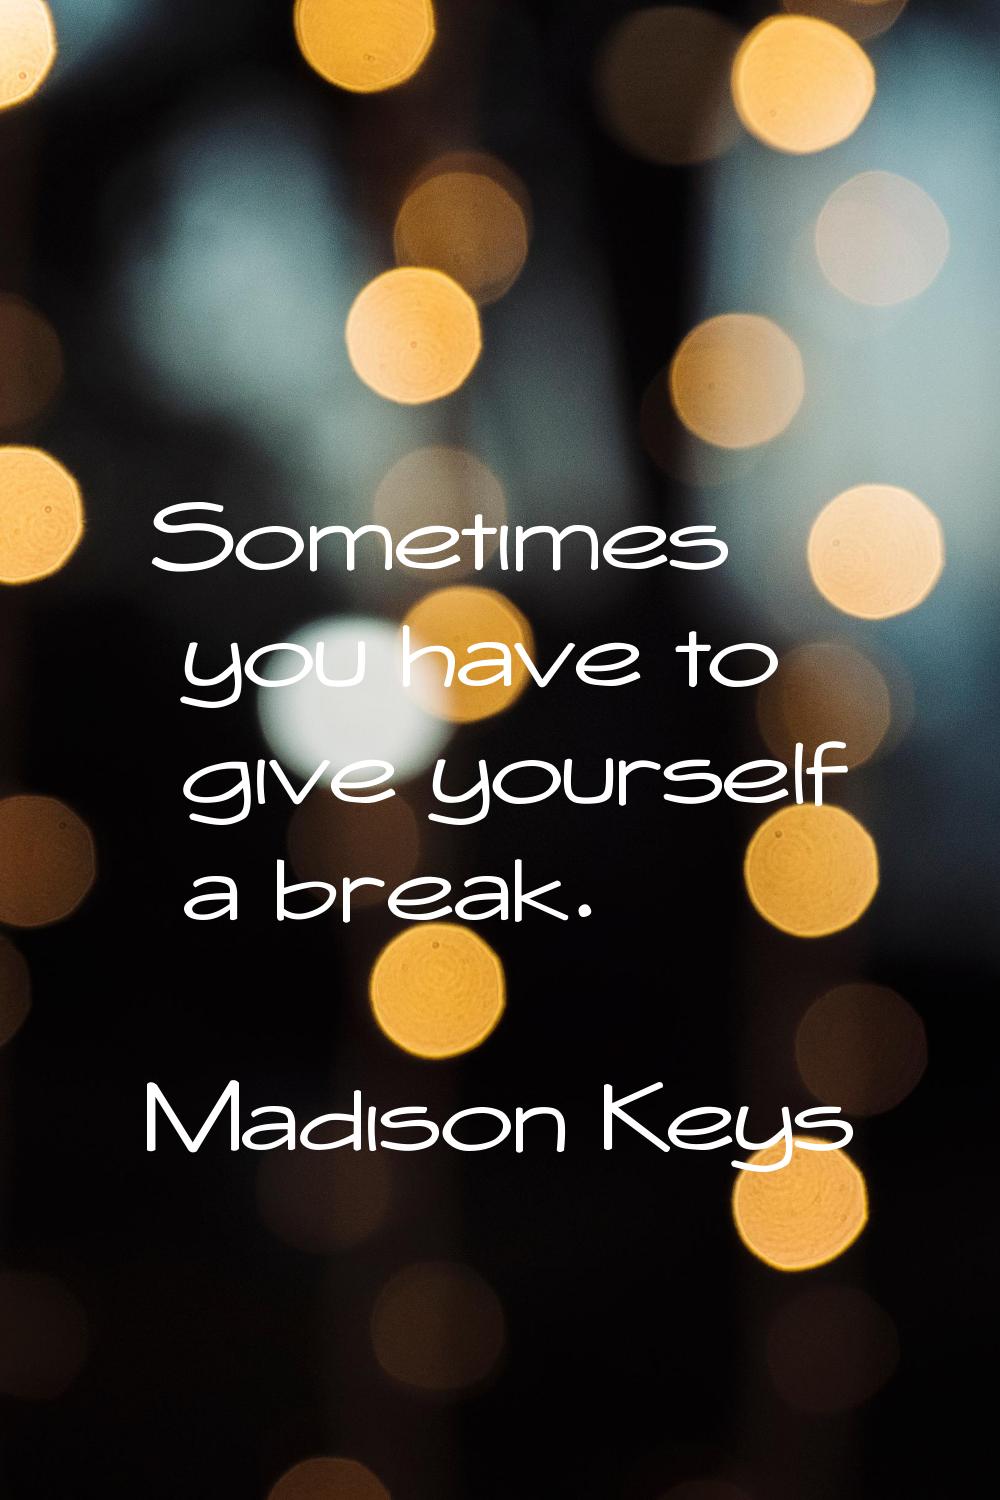 Sometimes you have to give yourself a break.